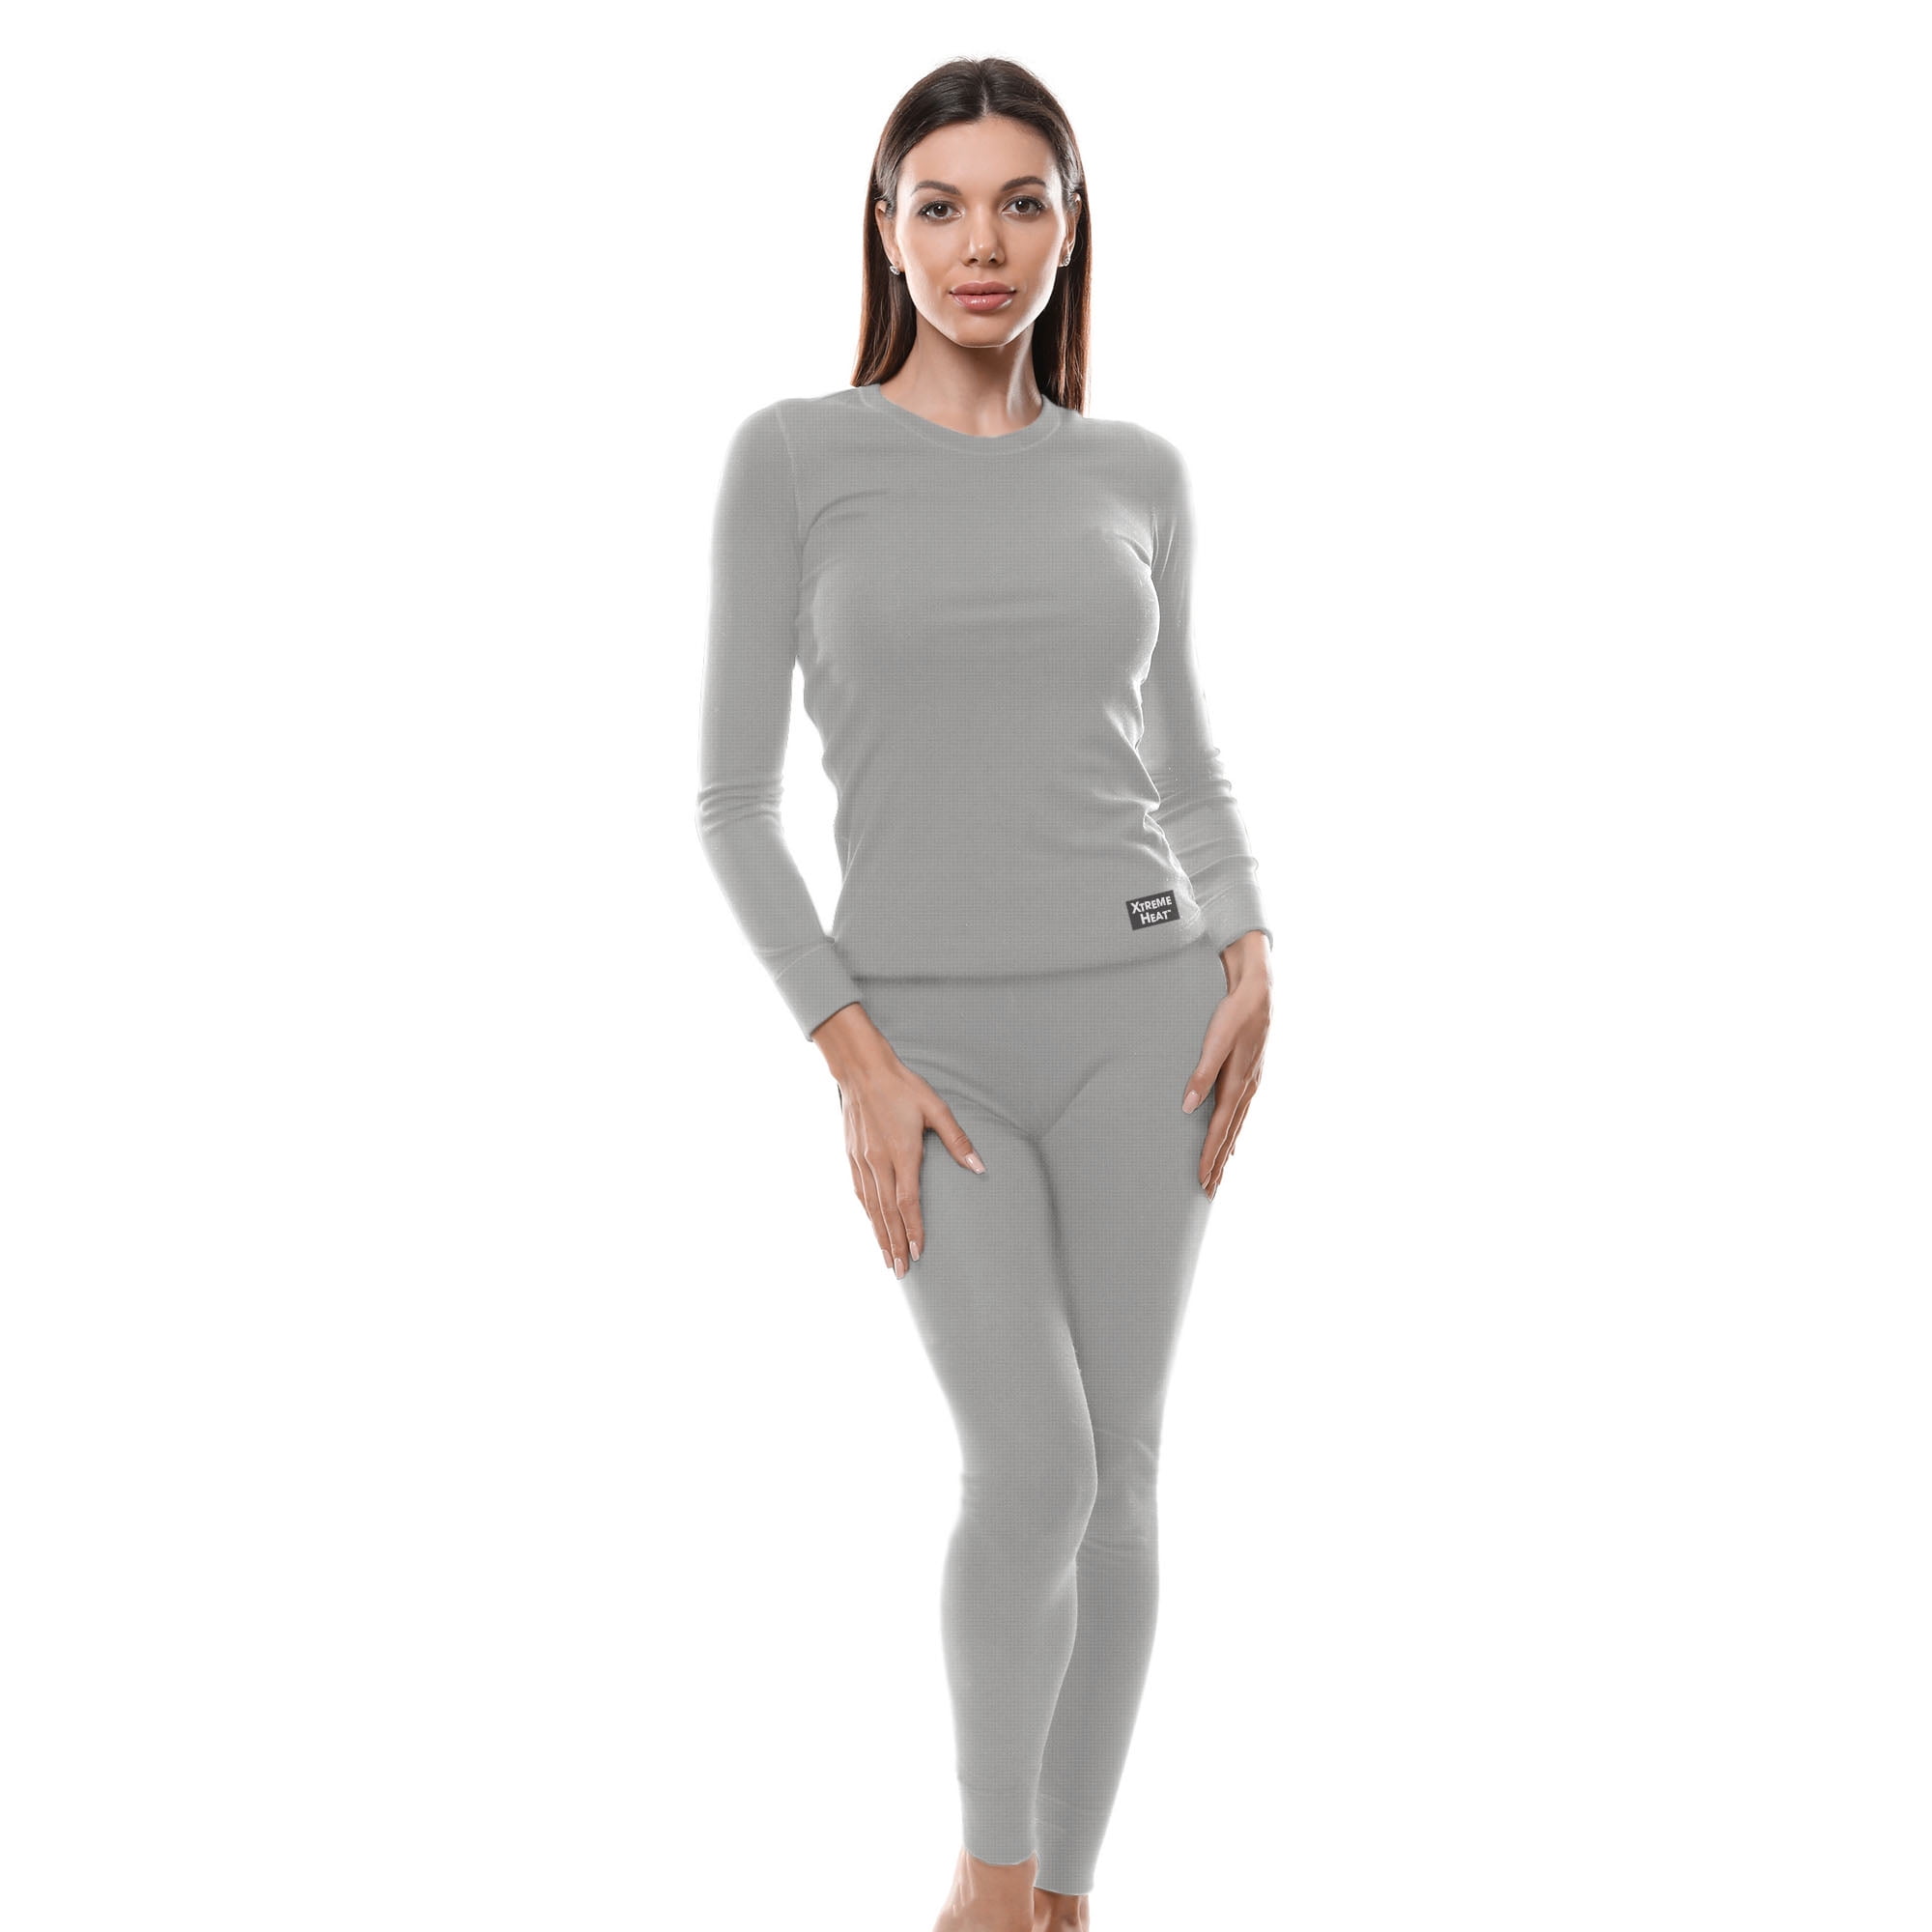 Xtreme Heat Women’s Thermal Underwear Set Insulated Shirt & Long Johns,  Light Heather Gray Small 2-Pack